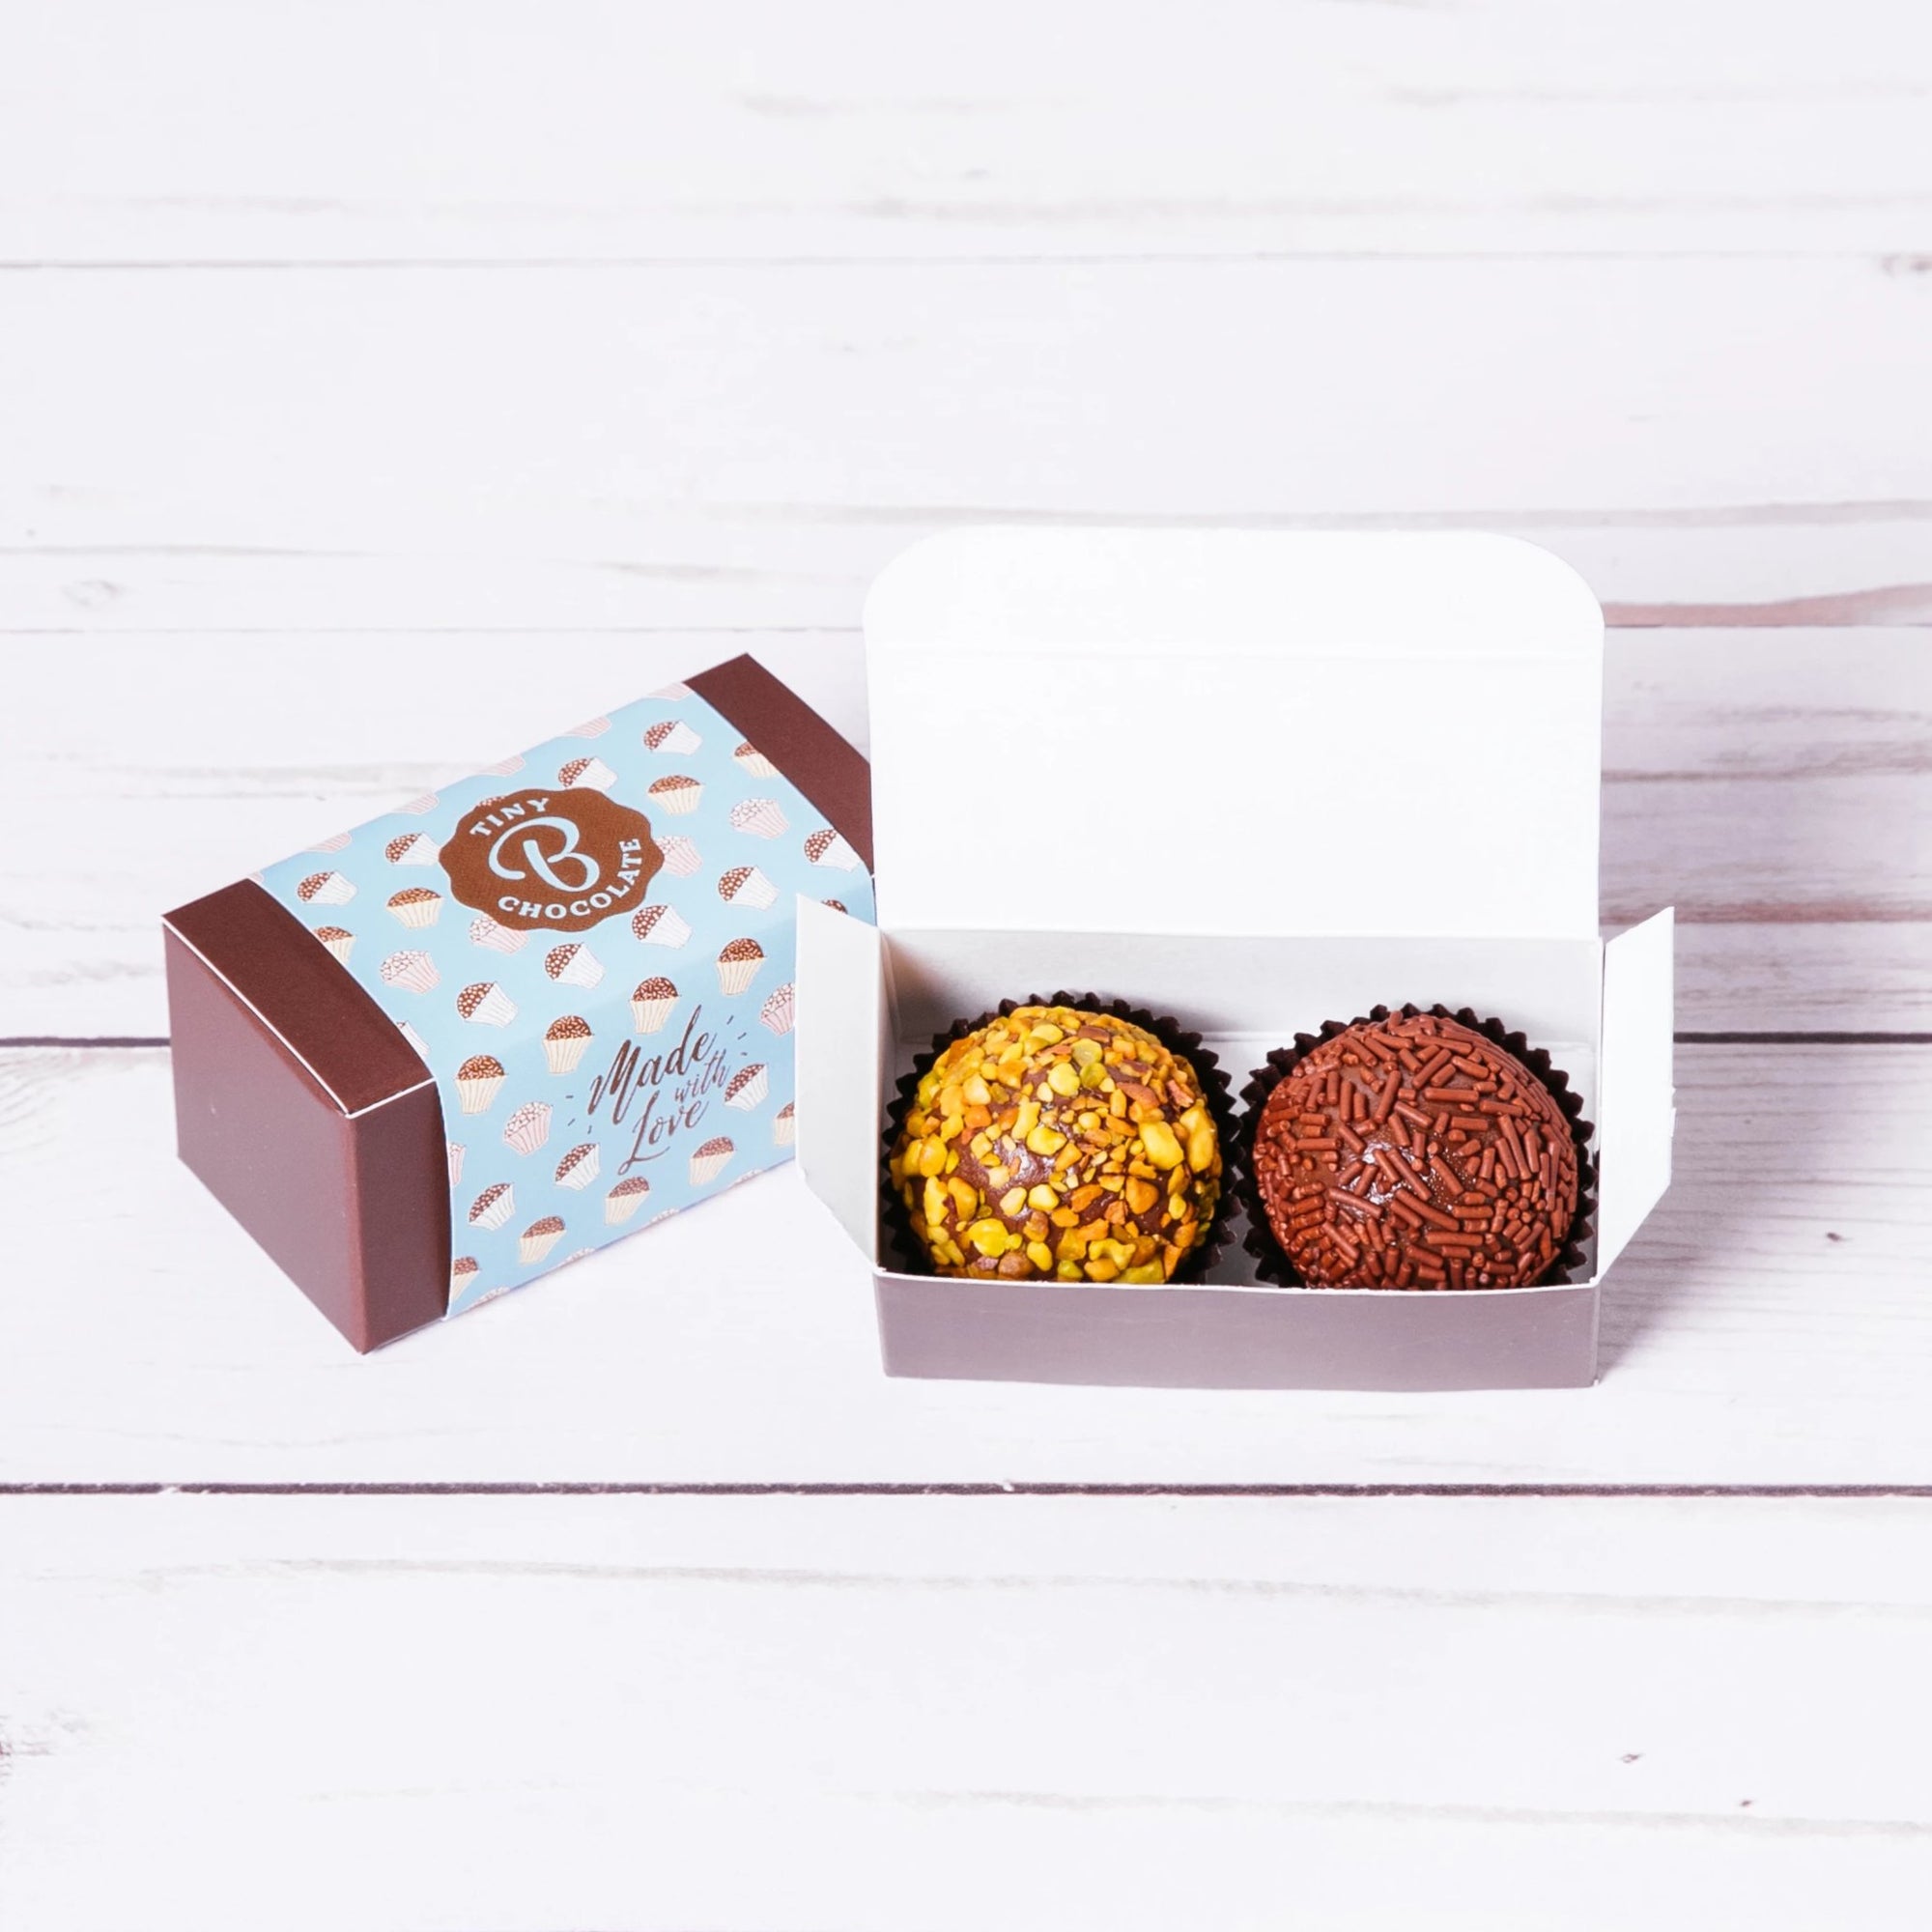 Brigadeiro party favor in a "Made with Love" box